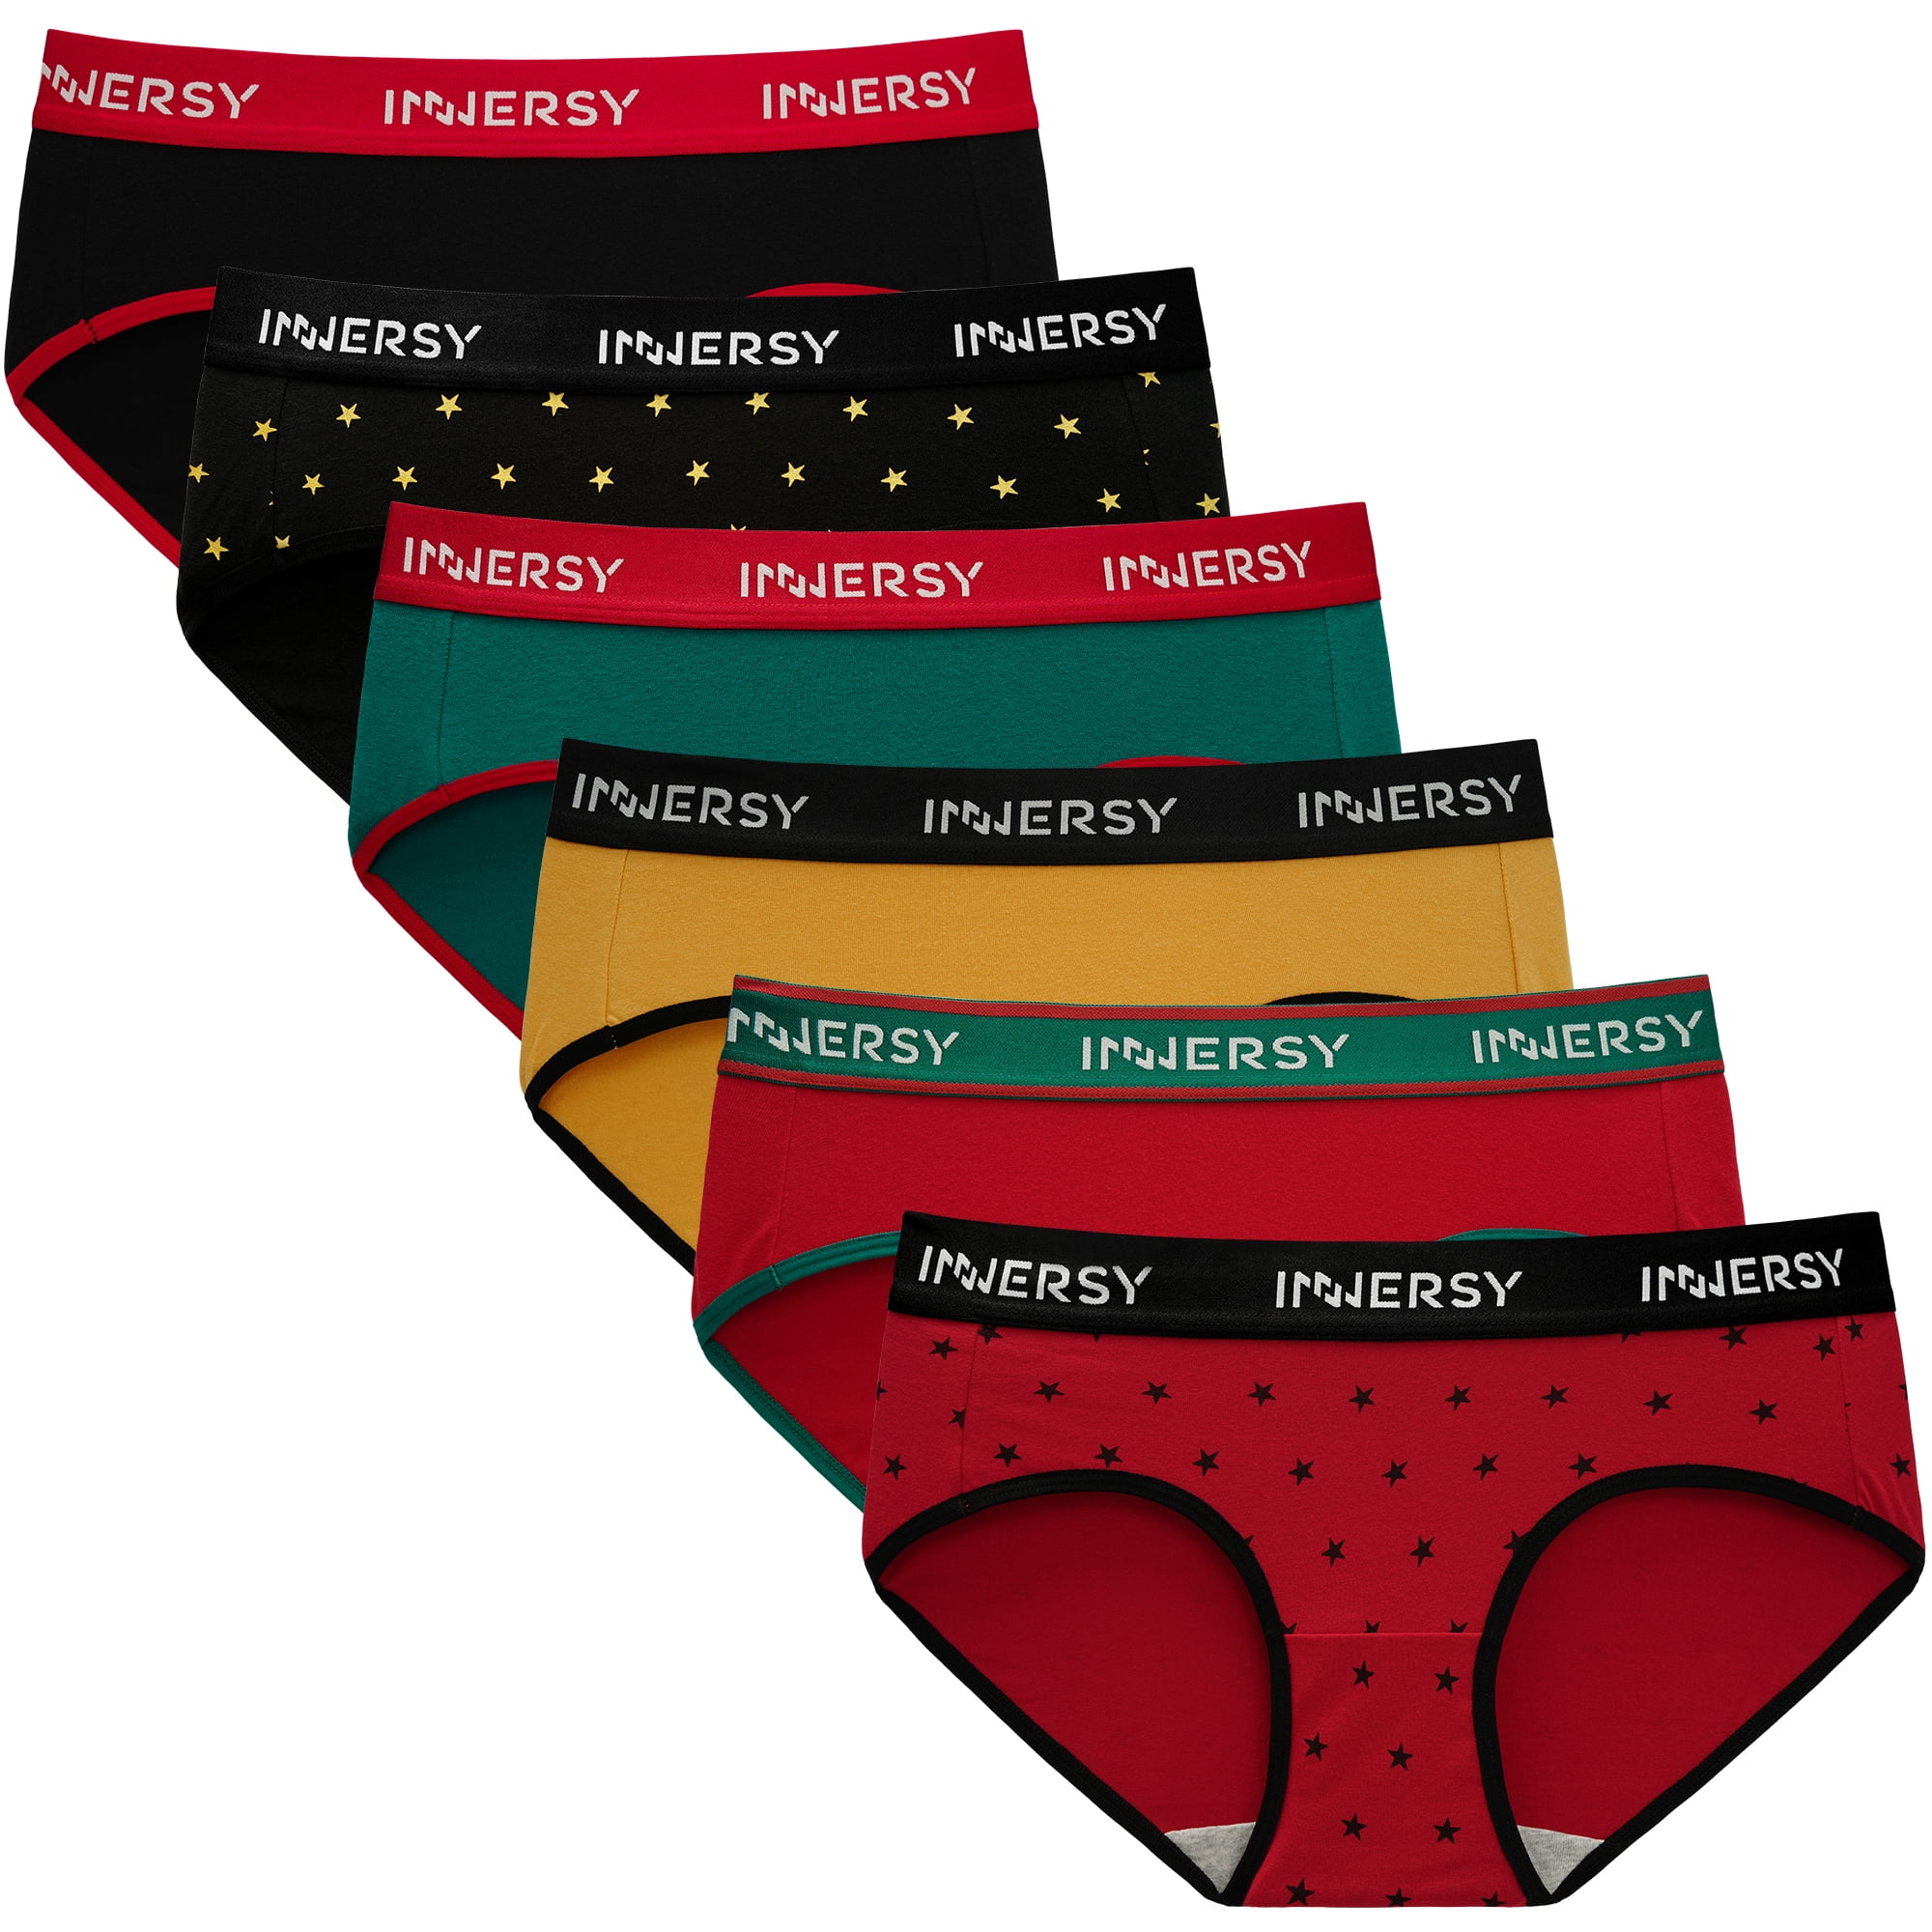 INNERSY Womens Cotton Underwear Hipster Black Panties Wide Waistband 6-Pack  (XS, Black) 